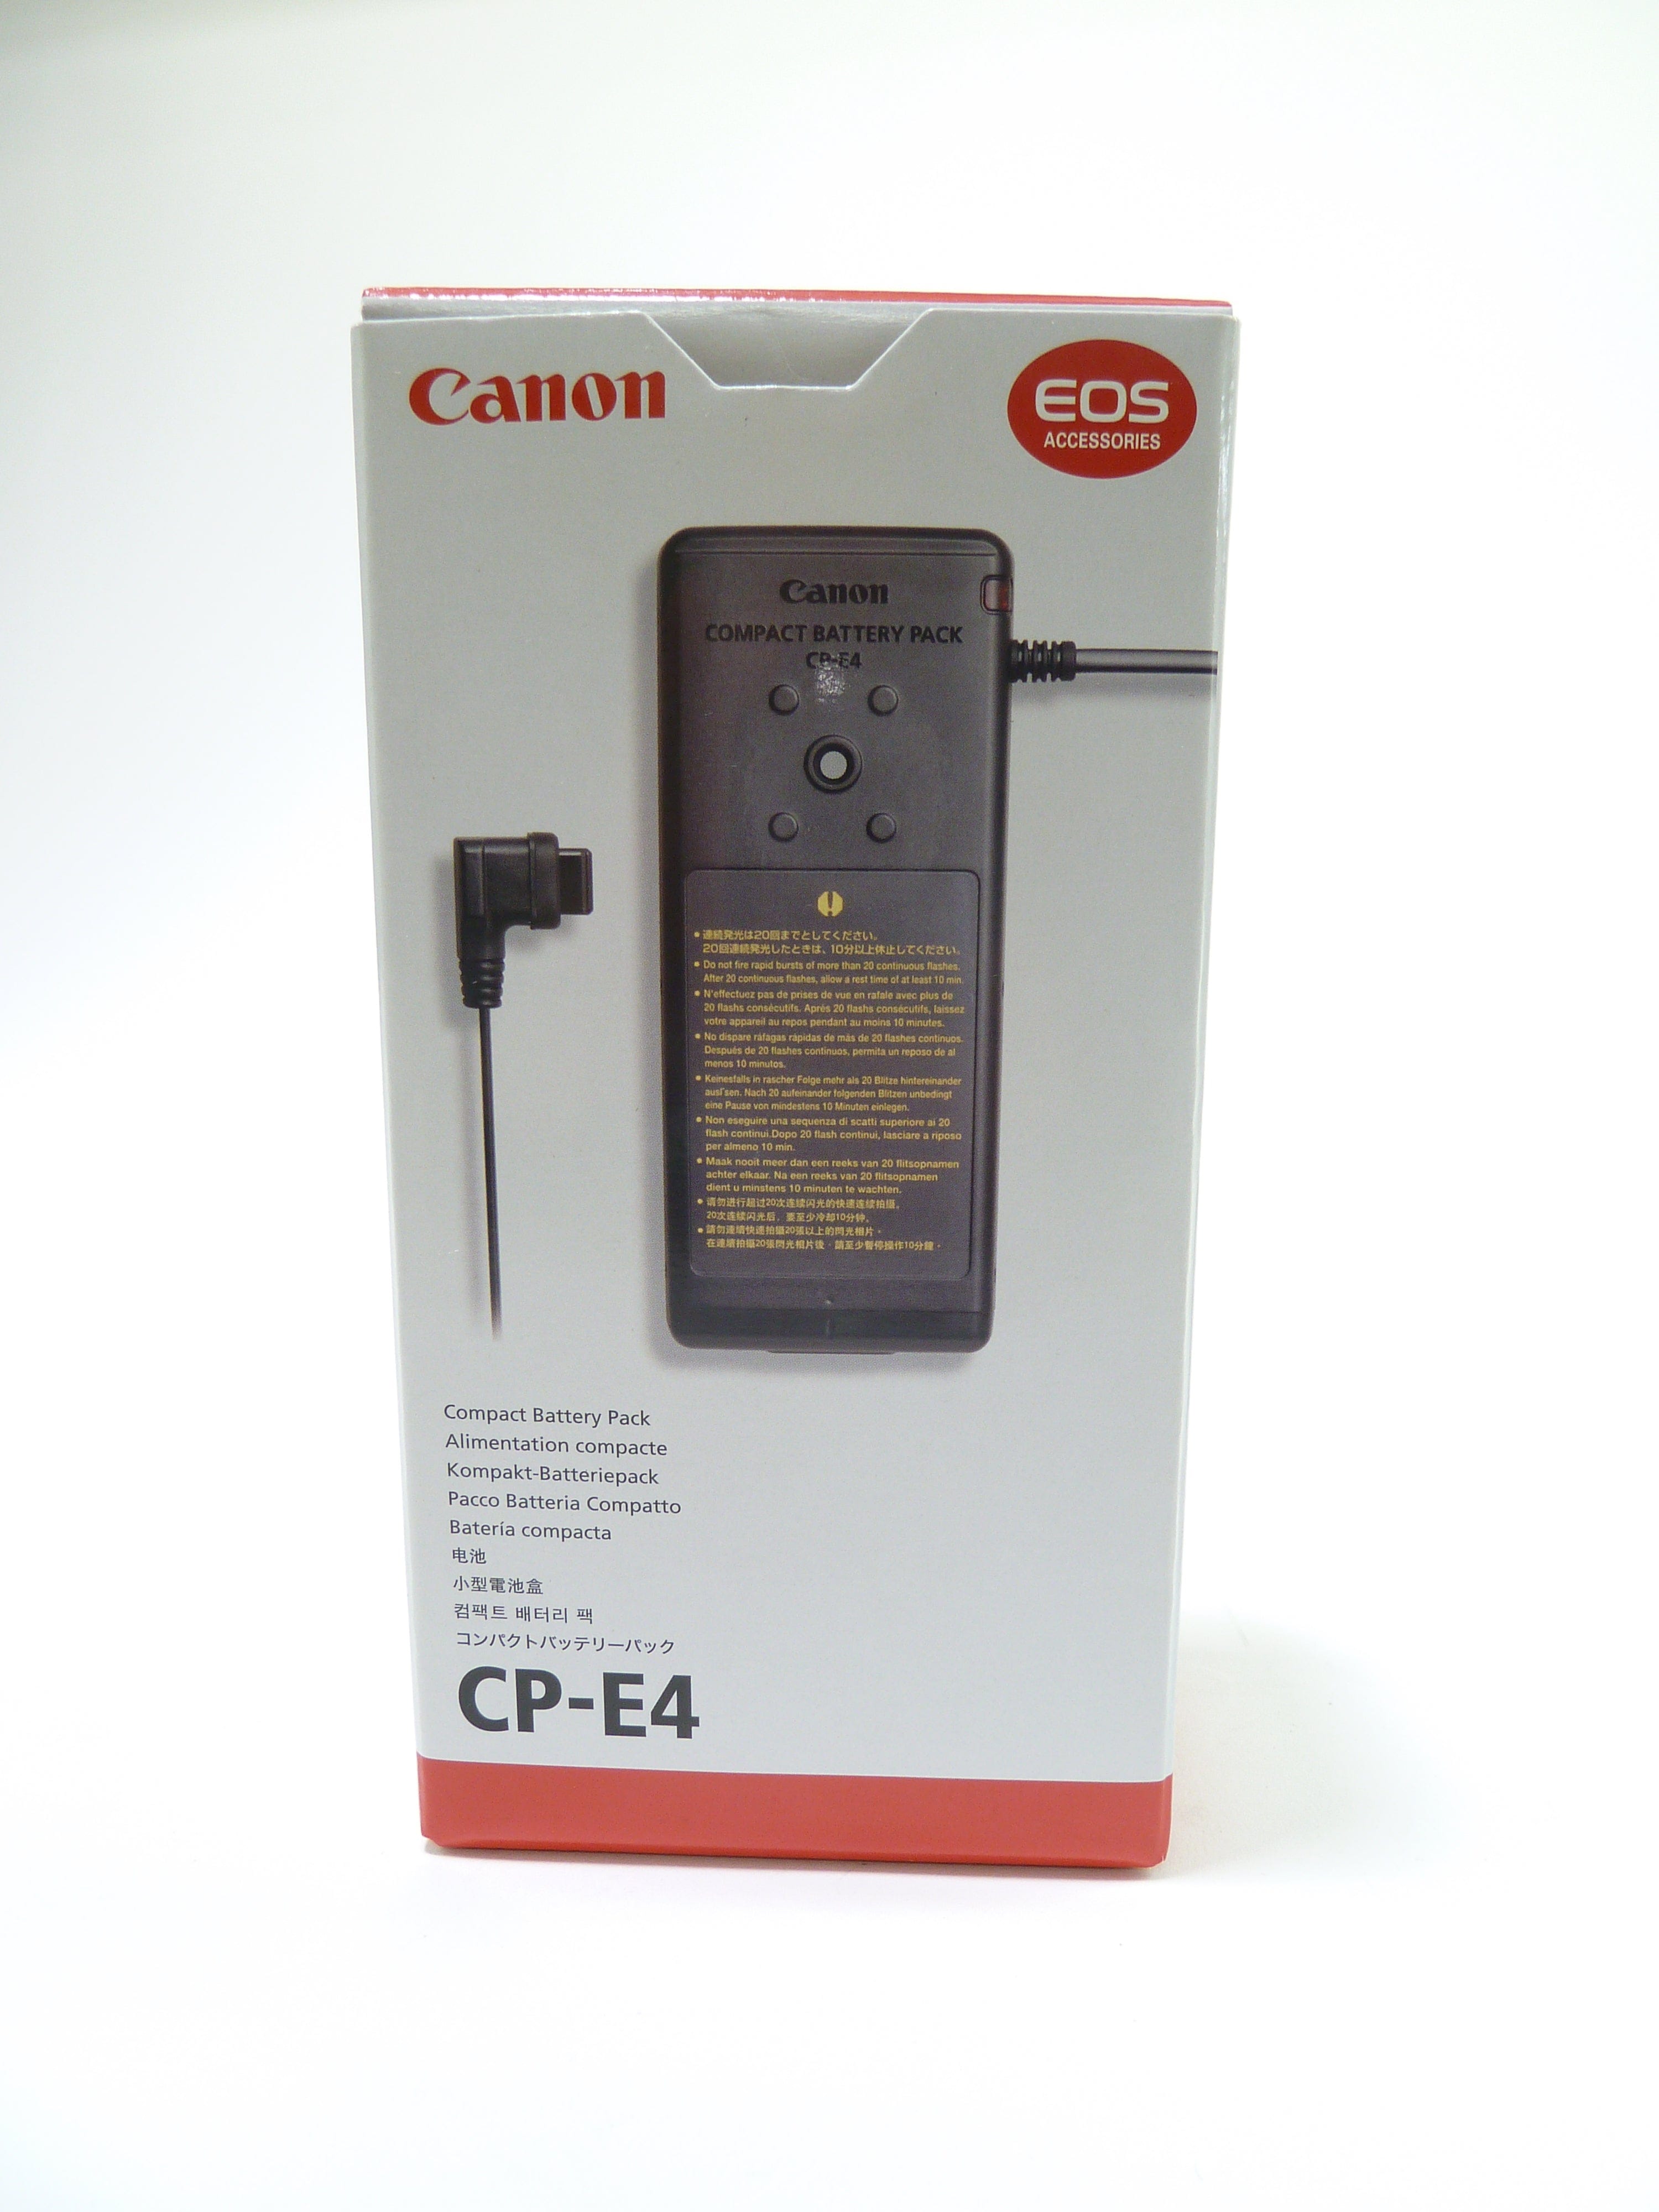 Canon Compact Battery Pack CP E4 with soft case